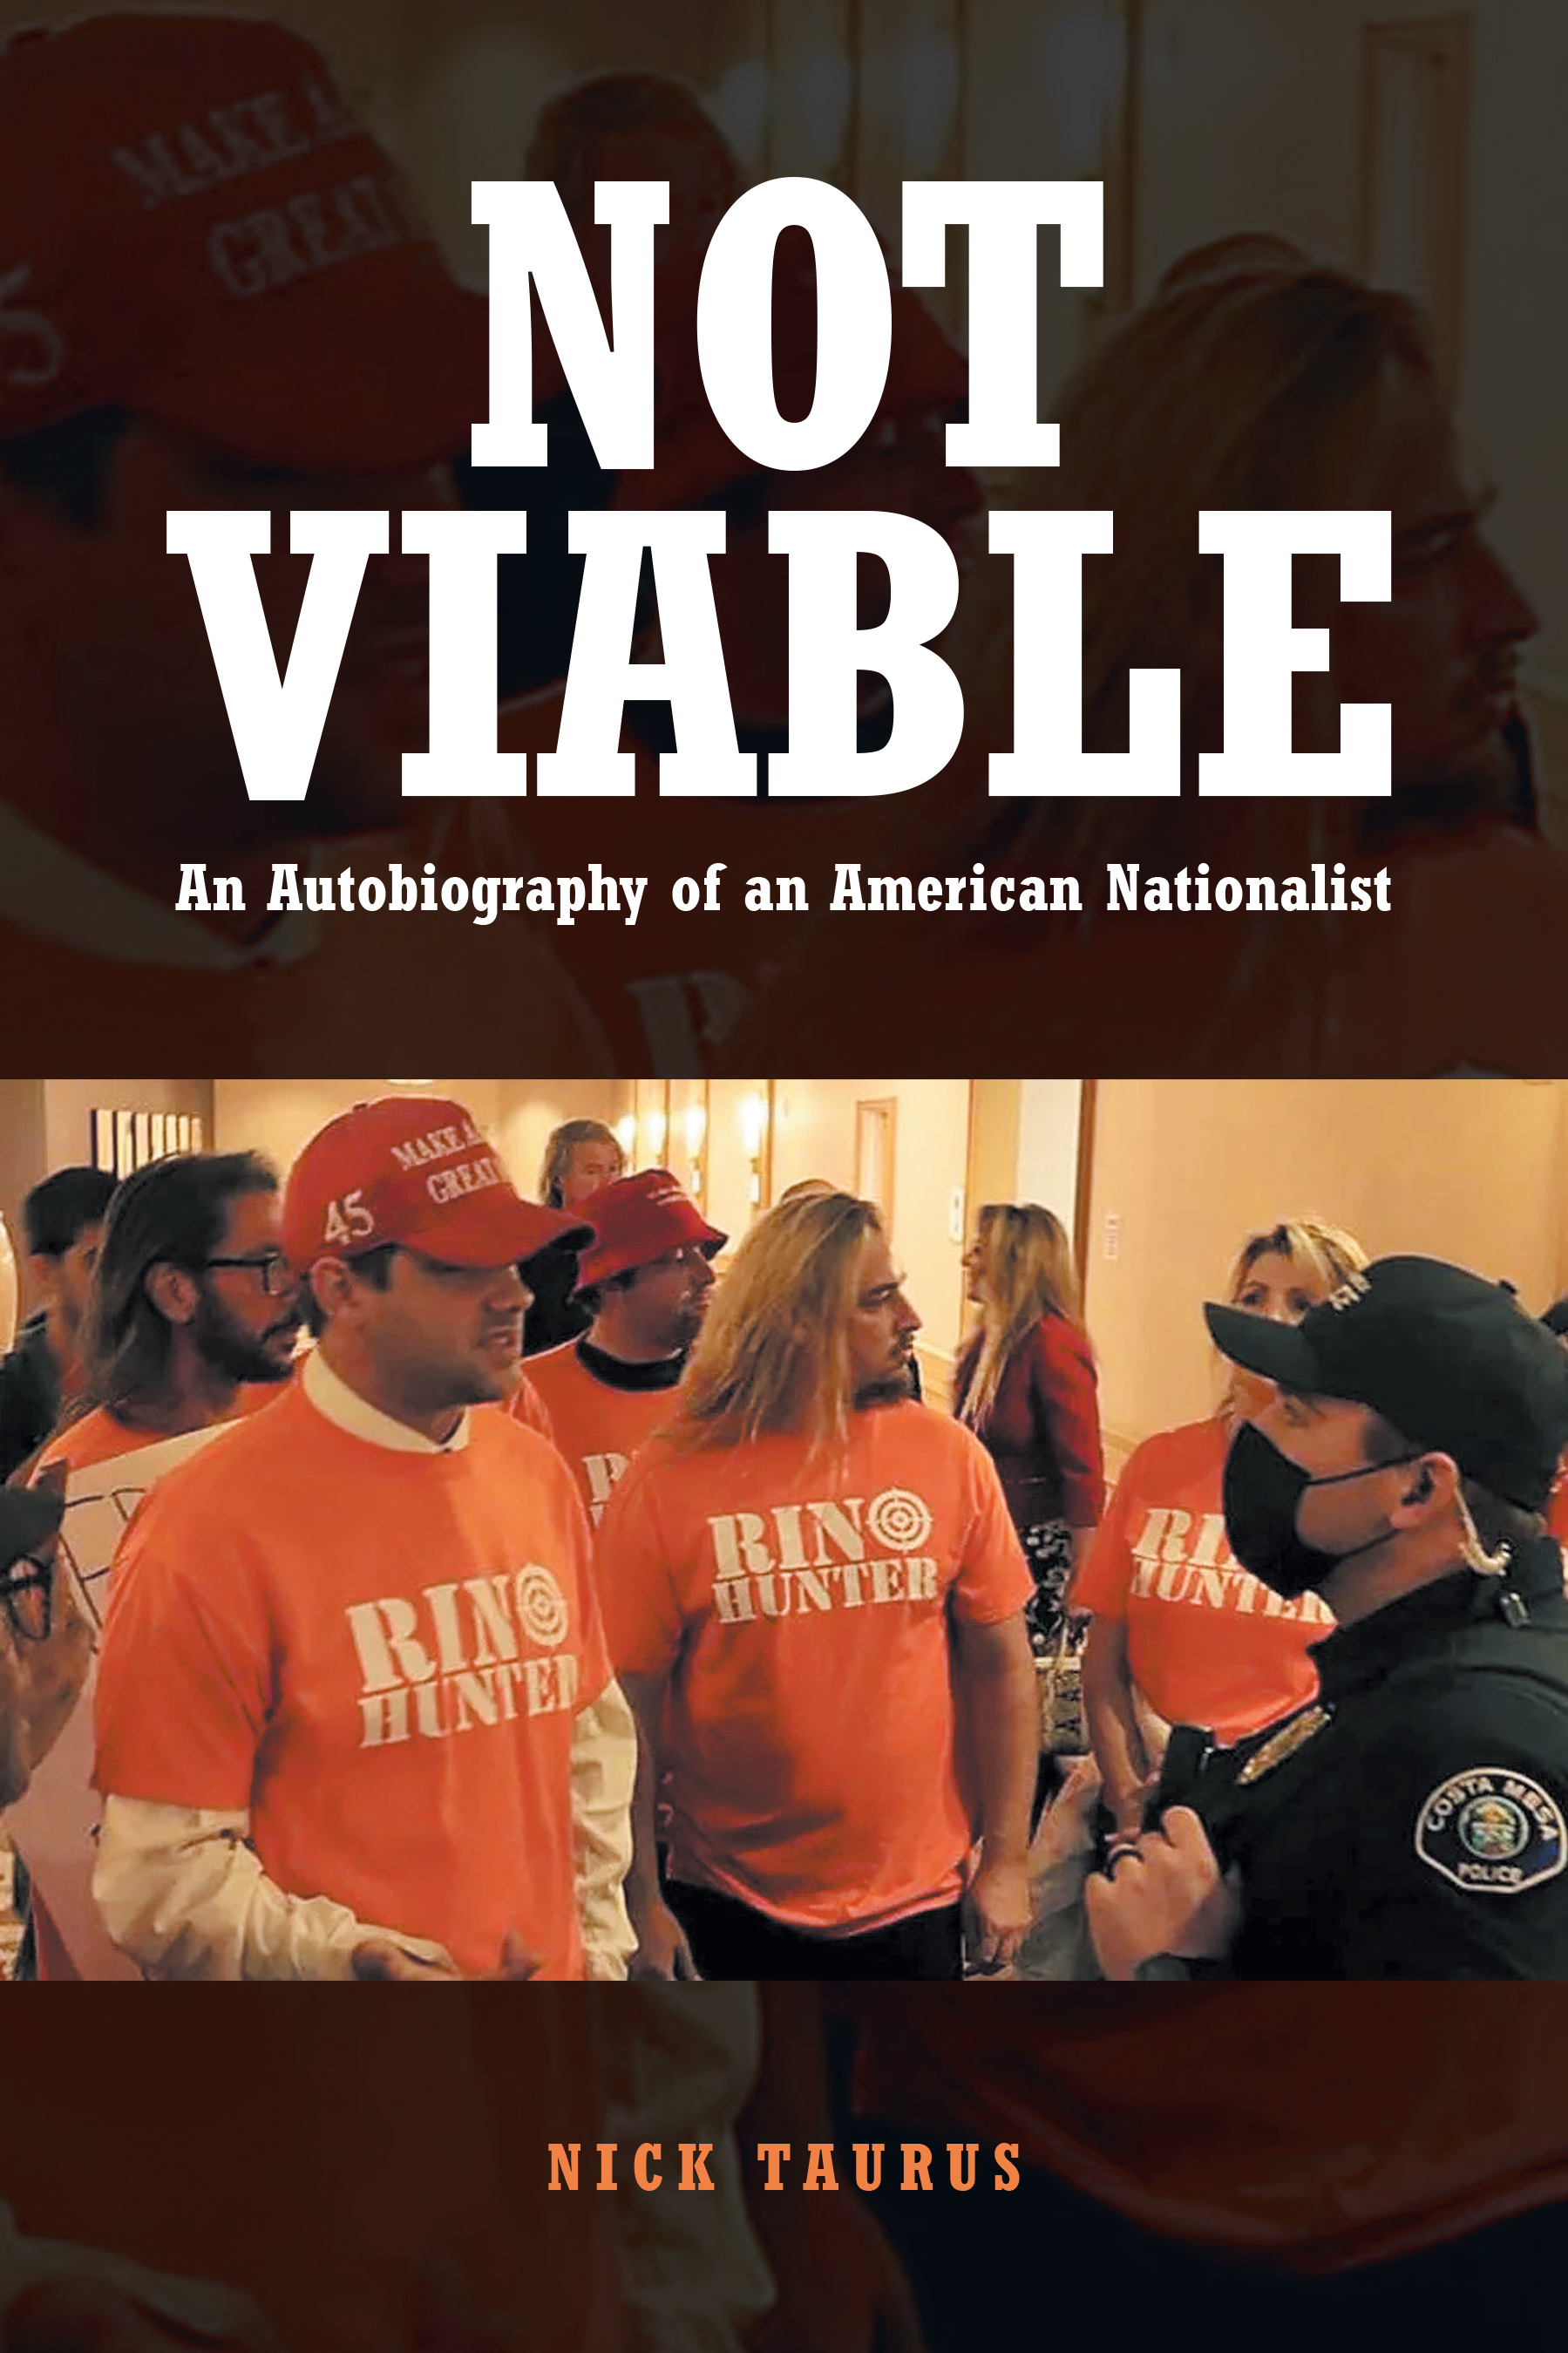 Nick Taurus’s New Book, “Not Viable: An Autobiography of an American Nationalist,” a Candid Critique of Contemporary American Politics and the Country's Future